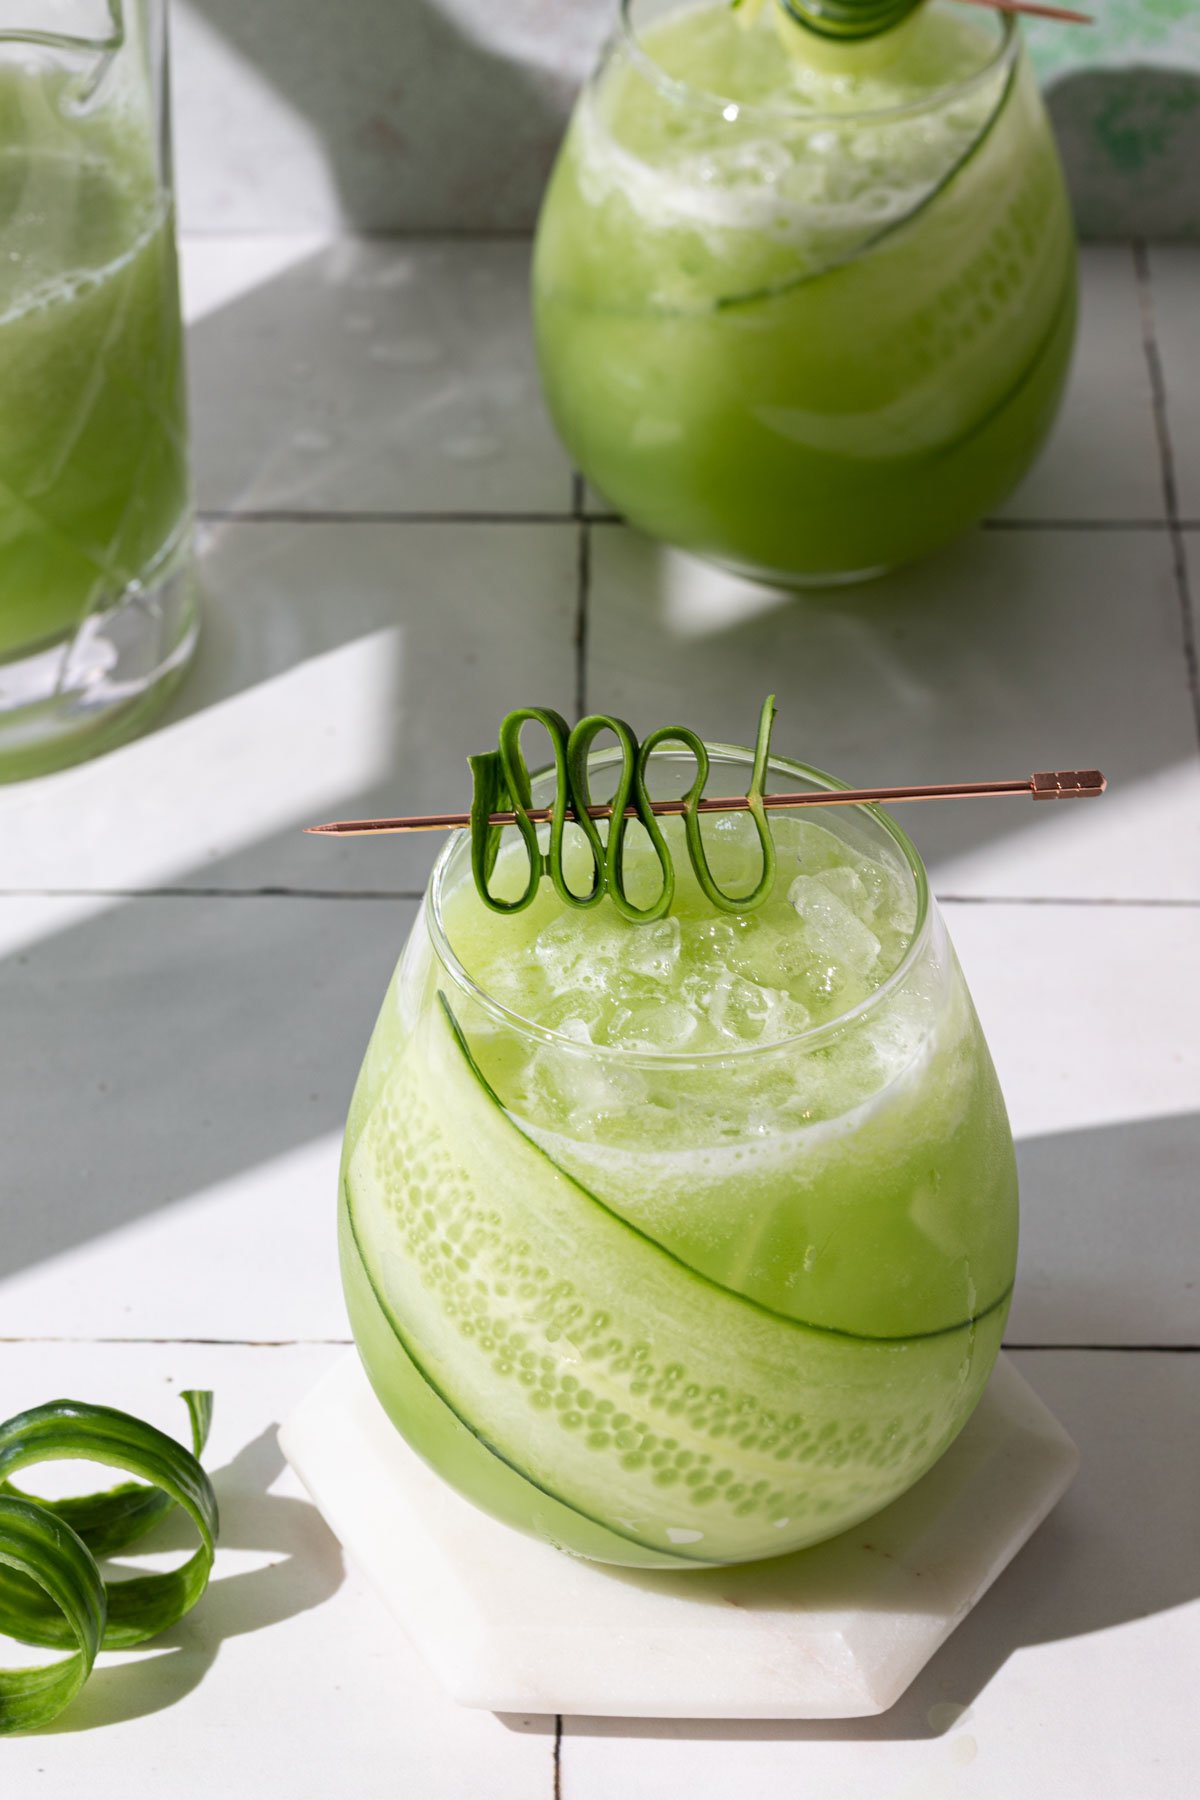 Cucumber drink with a cucumber slice in glasses